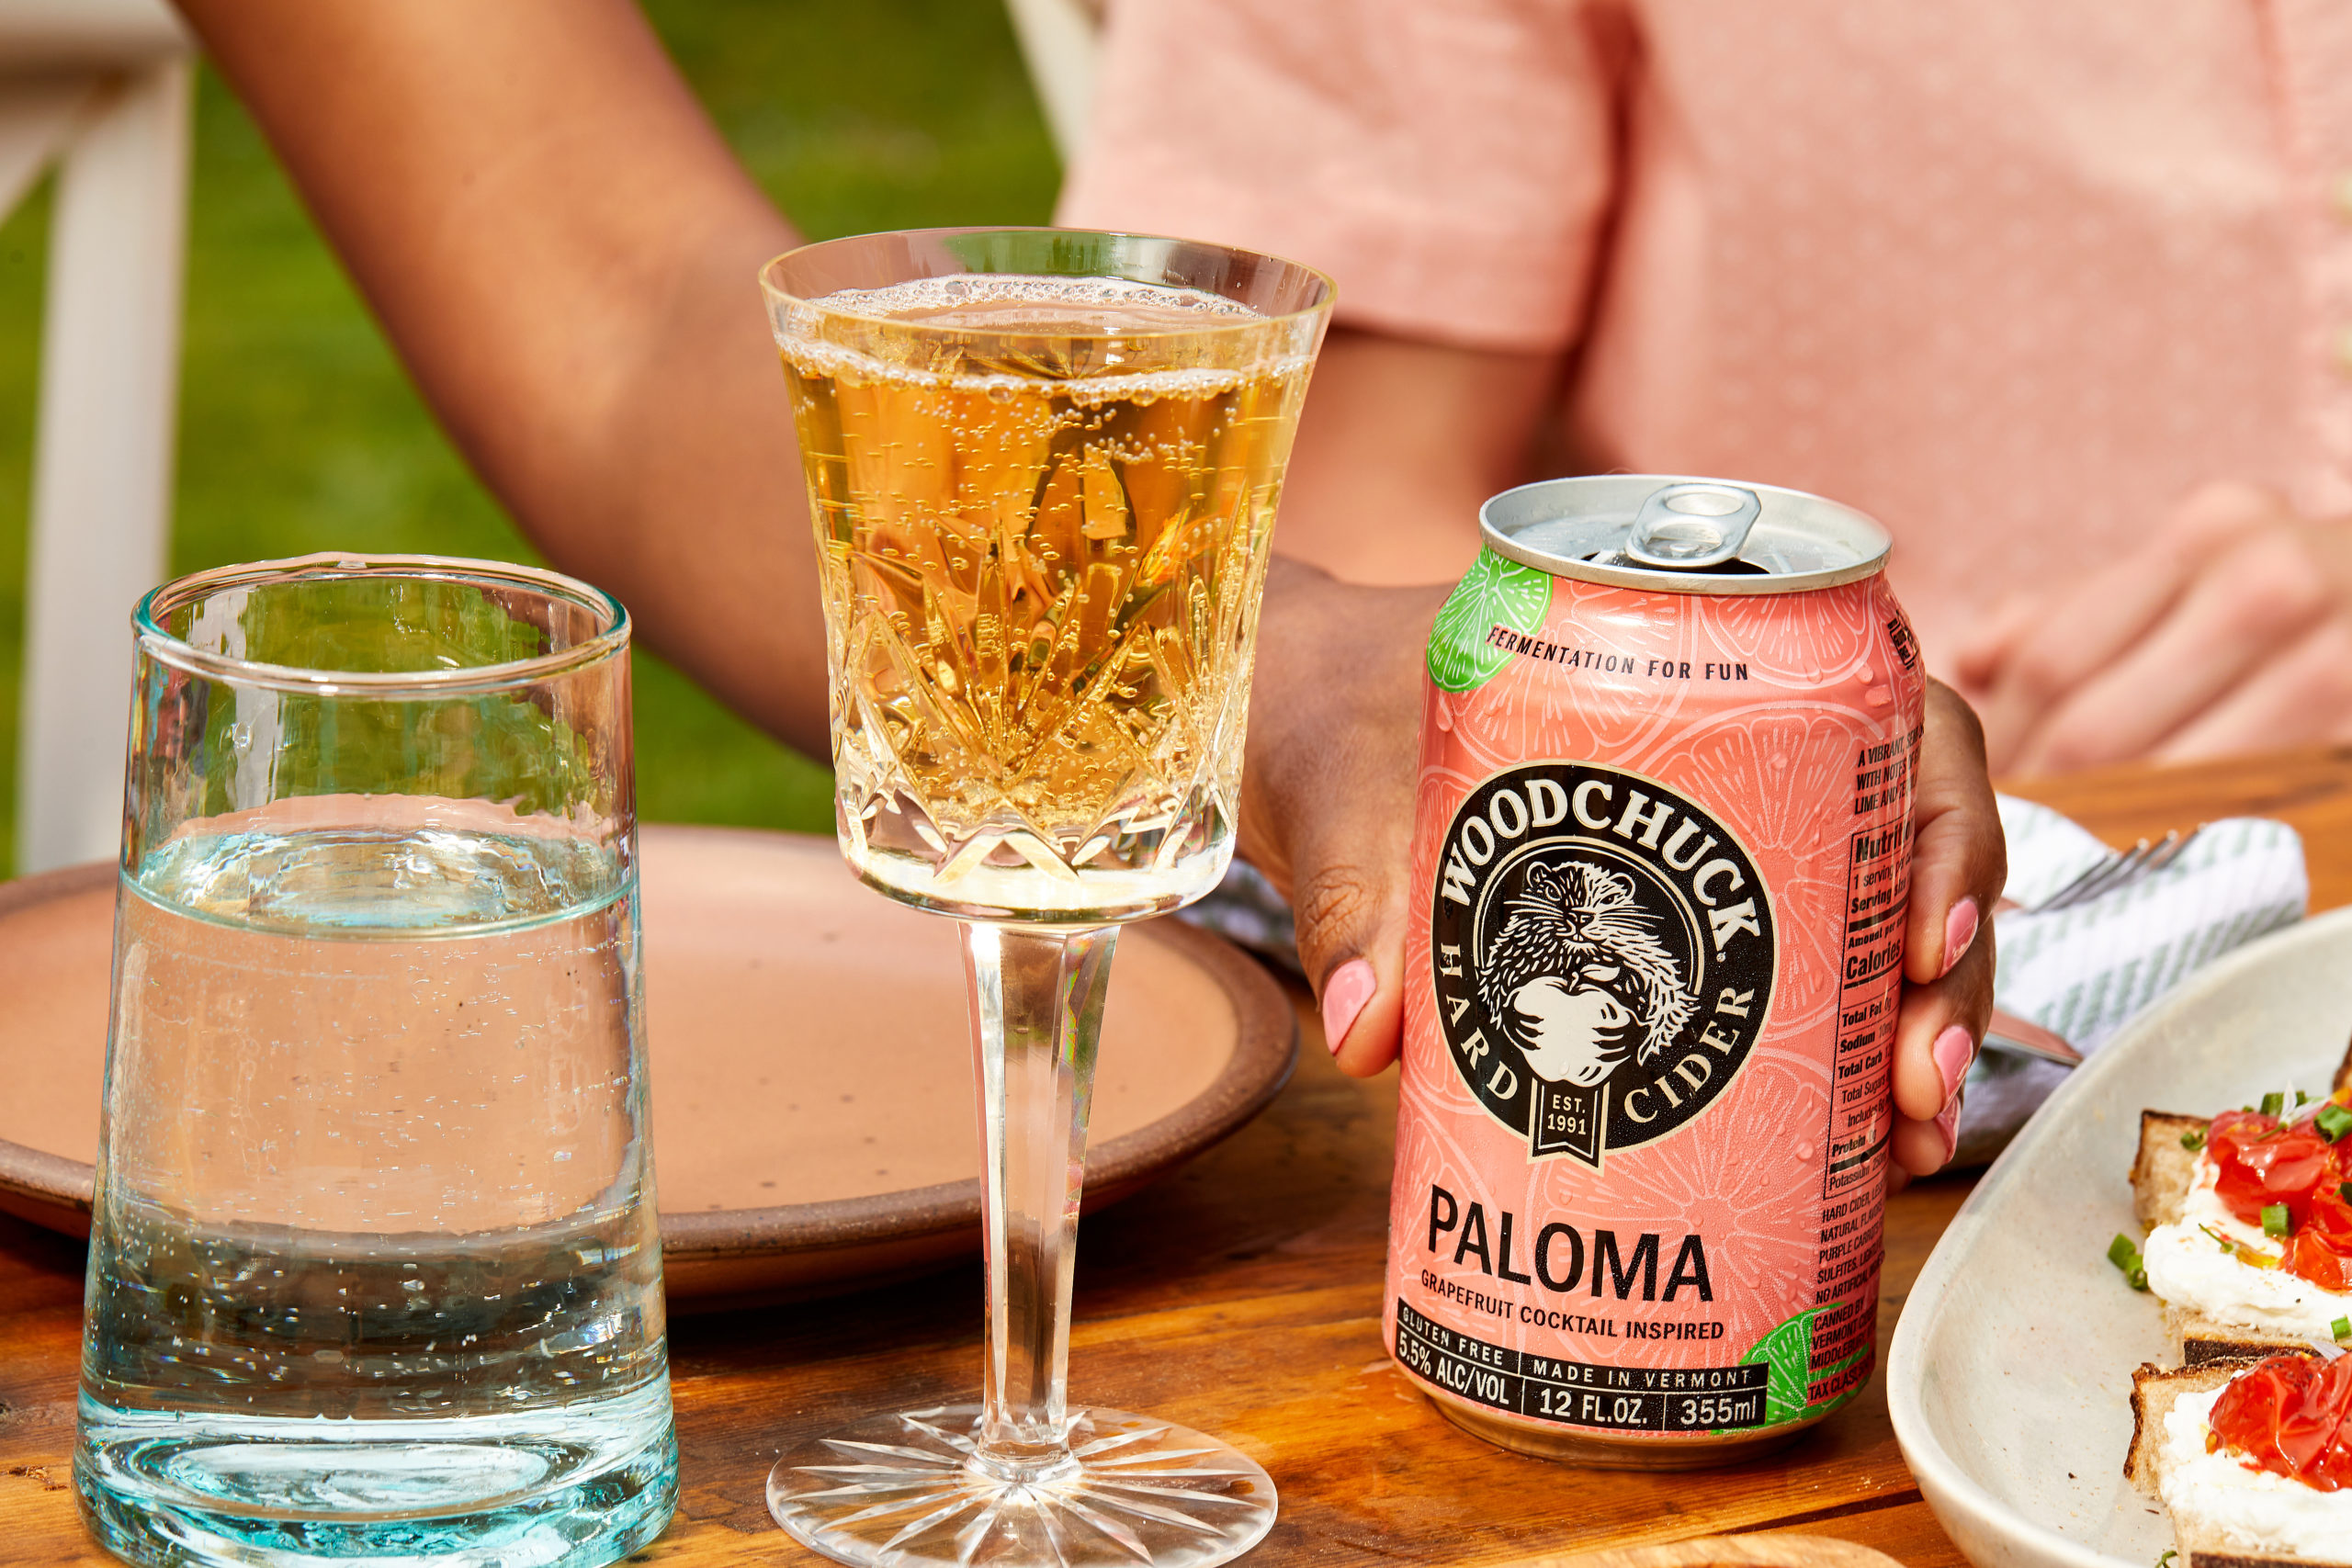 A hand holding a 12 oz can of Woodchuck Hard Ciders Paloma- grapefruit inspired cocktail - next to a champagne glass filled with sparkling Paloma Cider